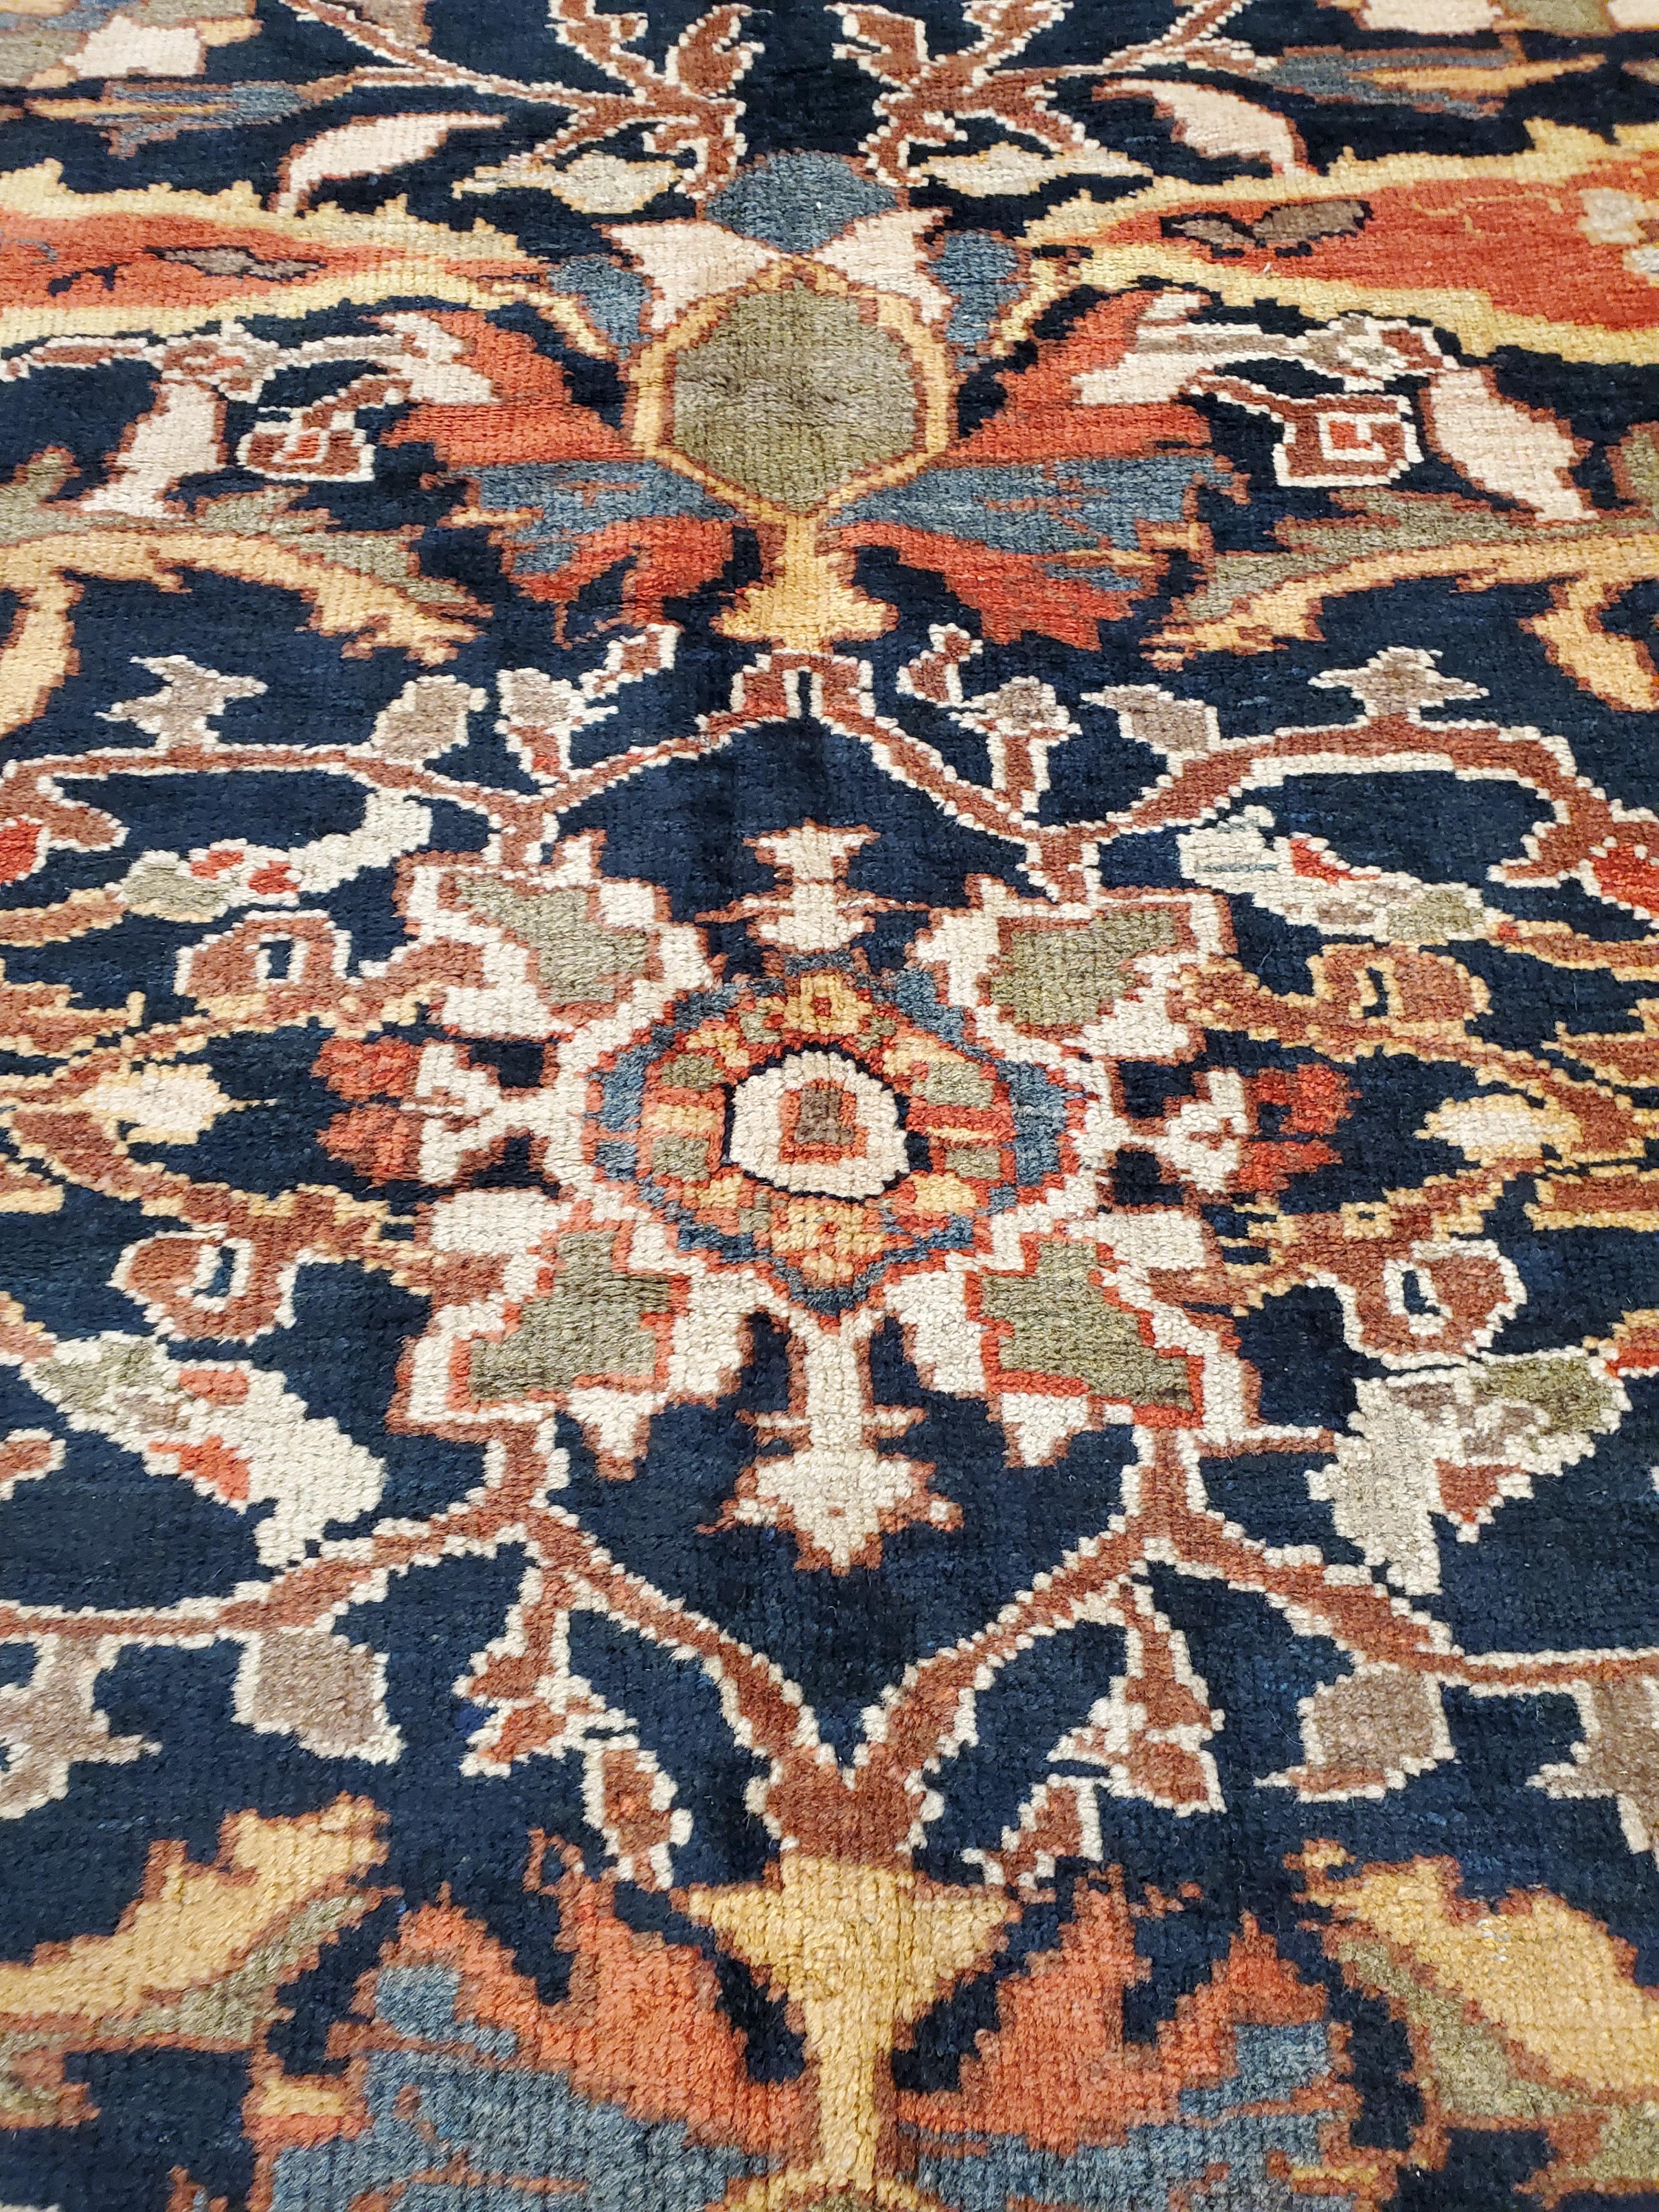 Antique Persian Sultanabad Carpet, Handmade Oriental Rug, Navy Blue, Rust, Gold For Sale 9